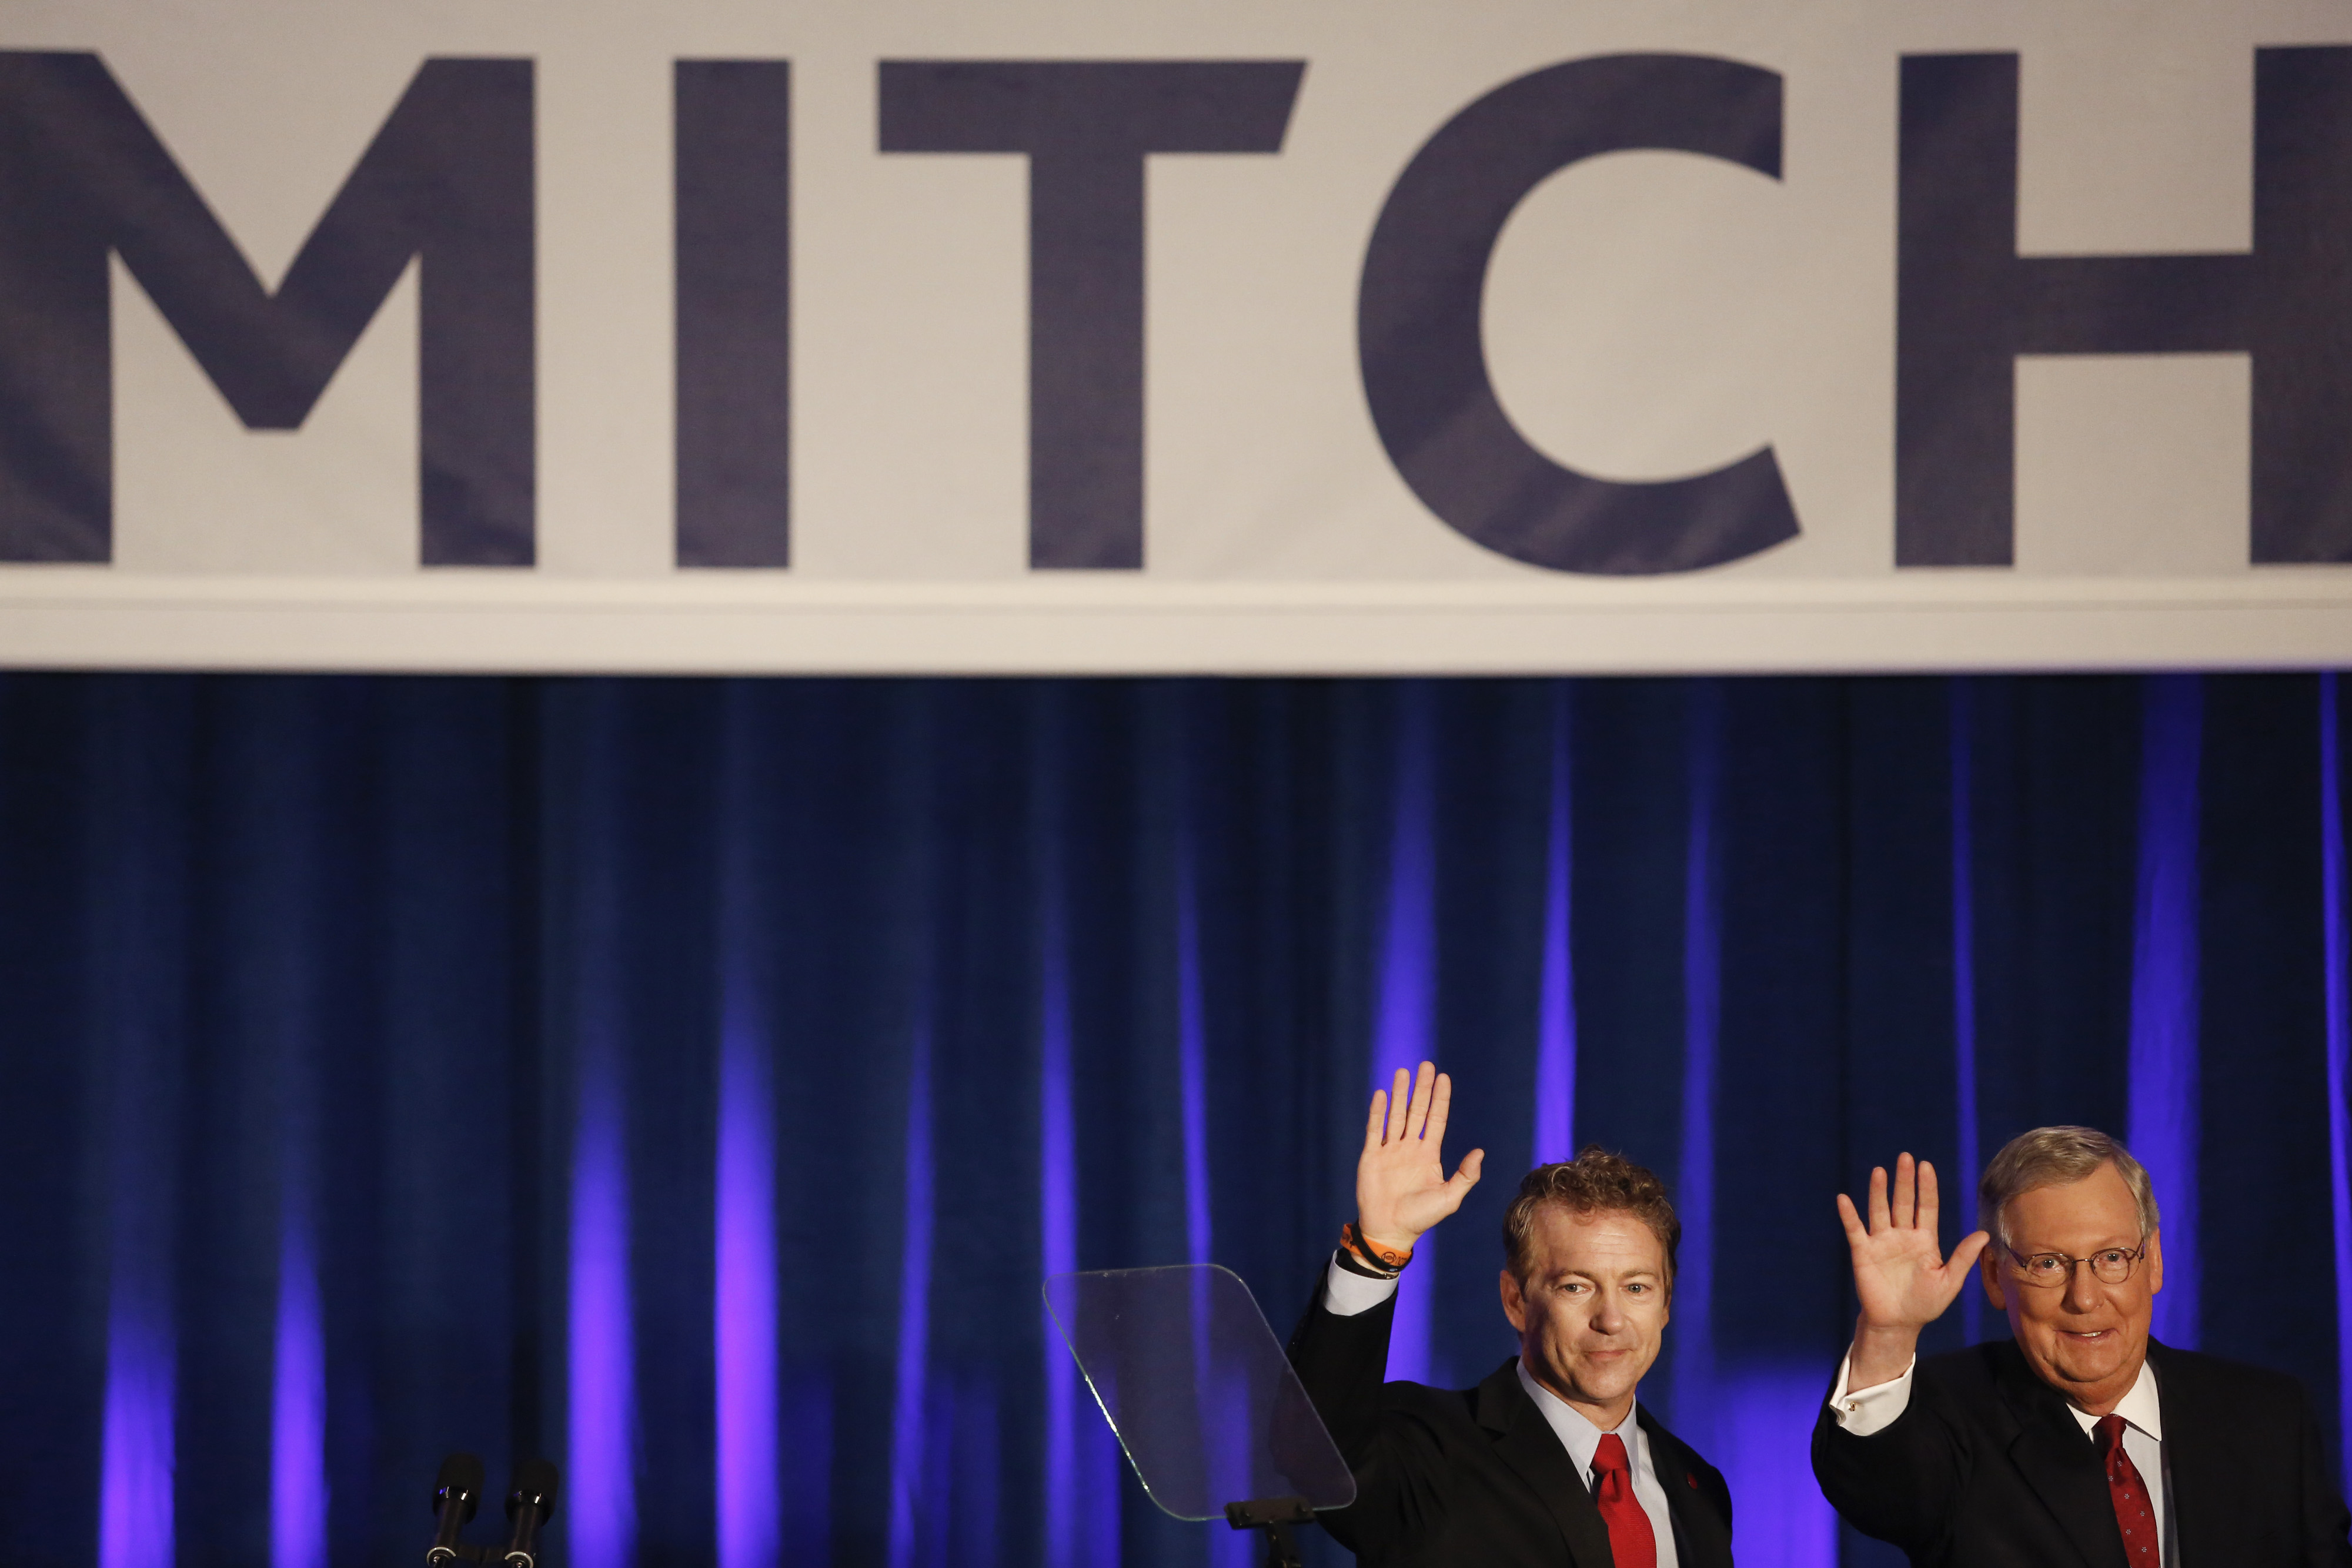 Senate Minority Leader Mitch McConnell and Senator Rand Paul wave to supporters at a Republican Party of Kentucky election night party in Louisville on  Nov. 4, 2014. (Luke Sharrett—Bloomberg/Getty Images)